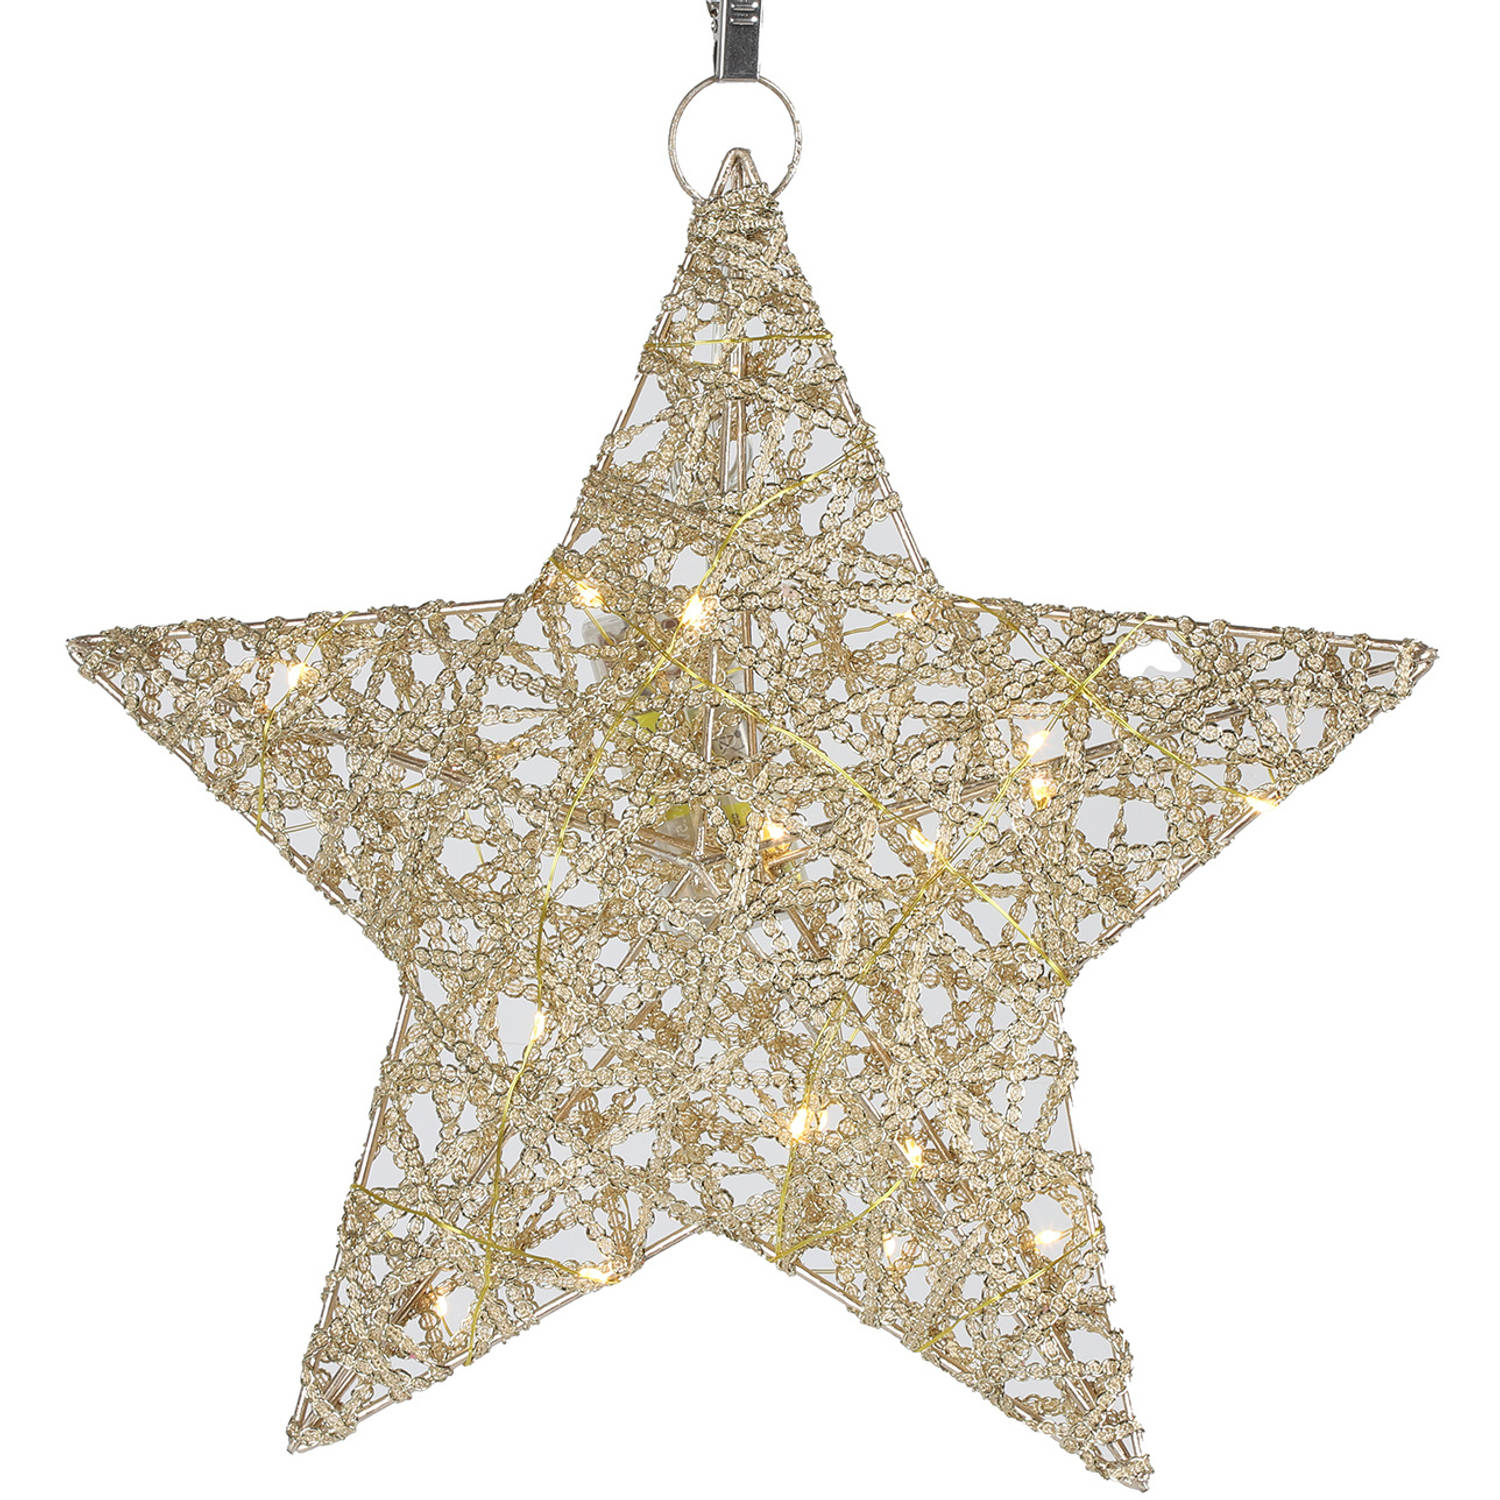 TOM kerstster Leonie A led 7,5 x 30 x 30 cm staal goud